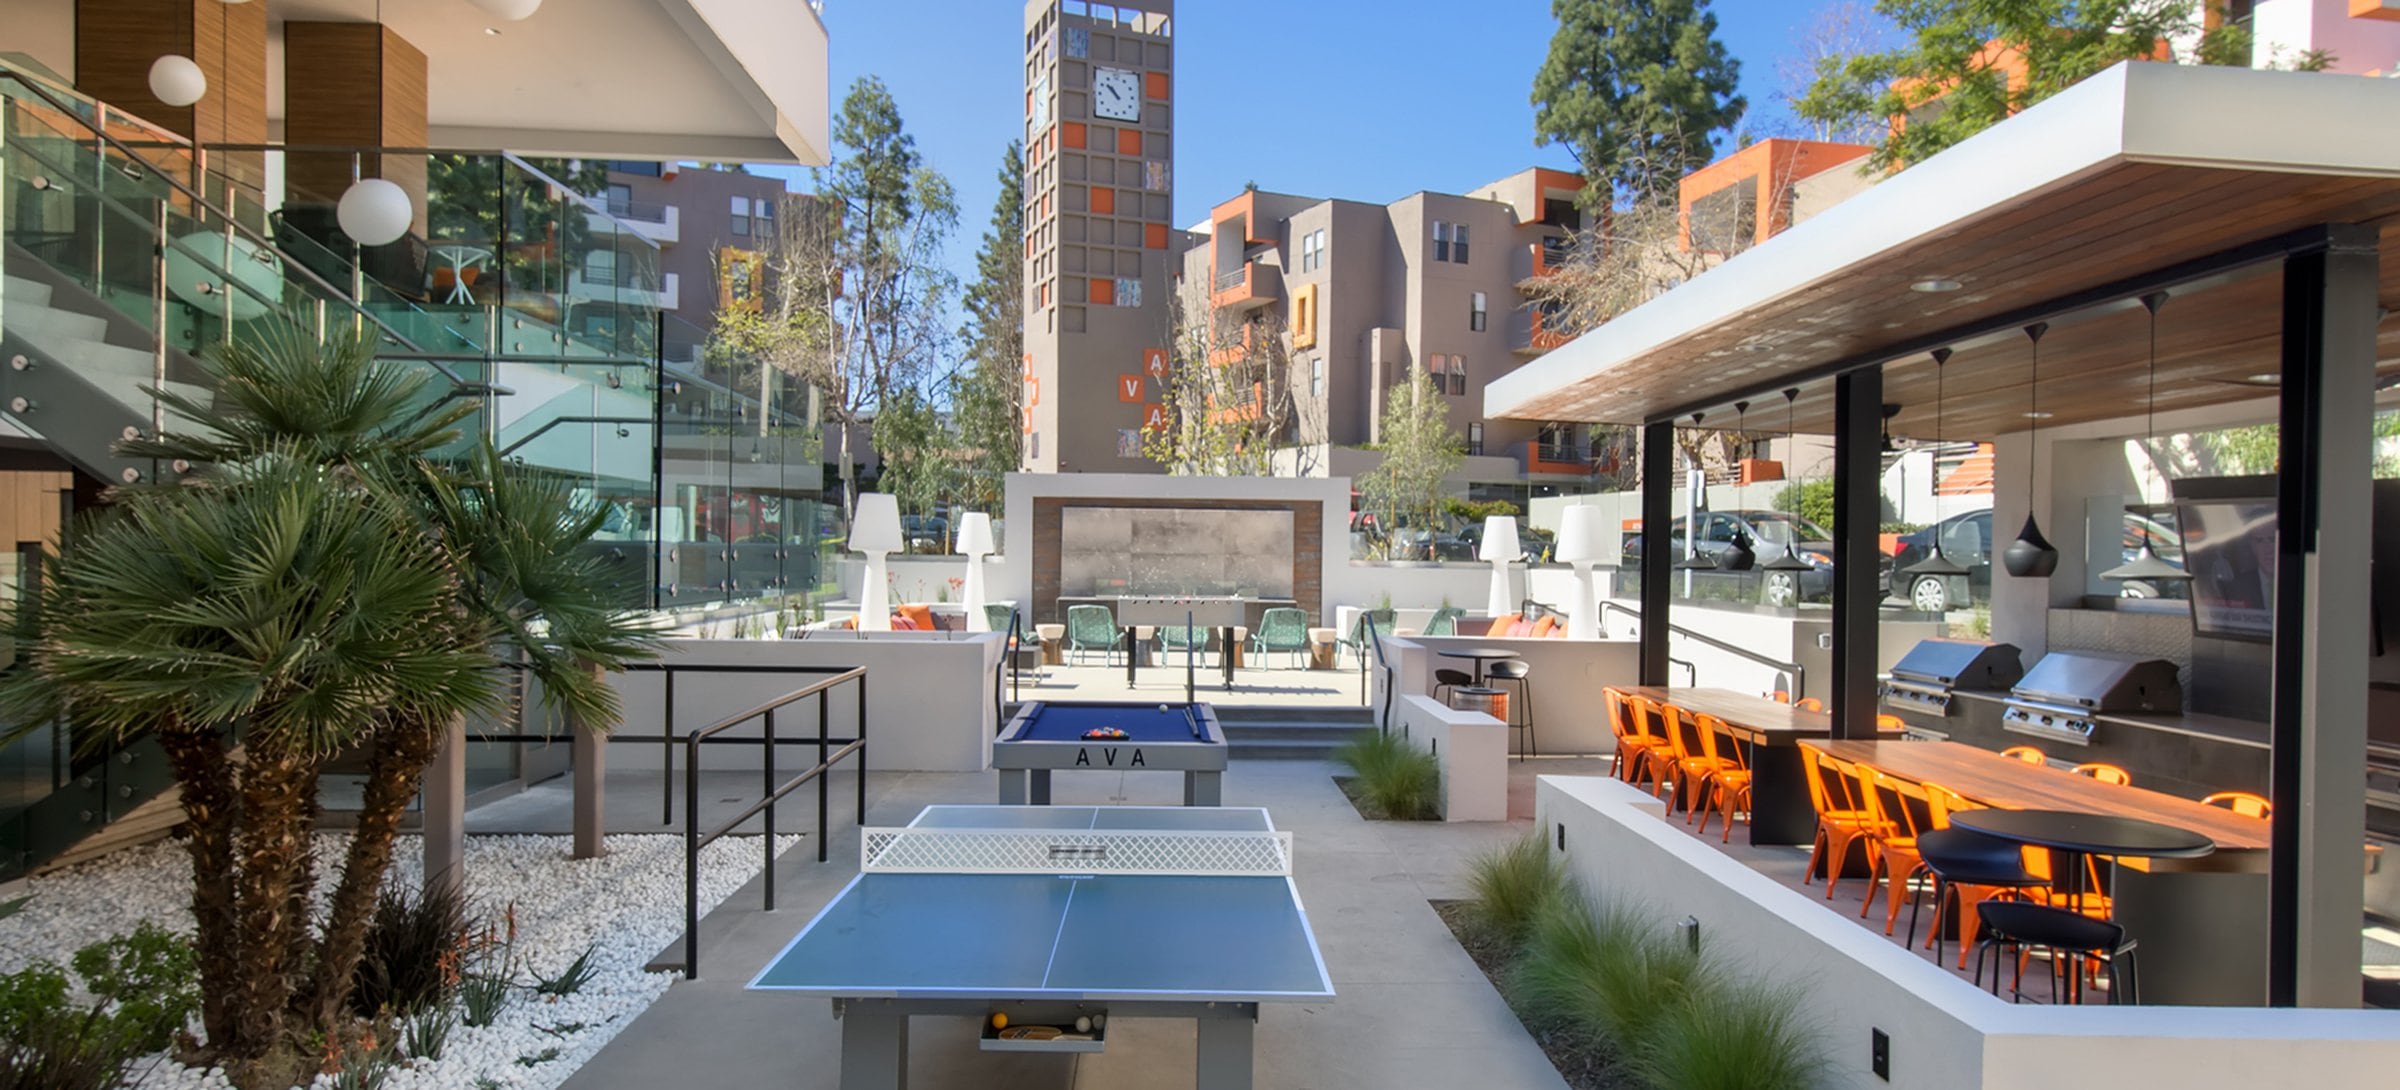 Courtyard with Outdoor Game Tables